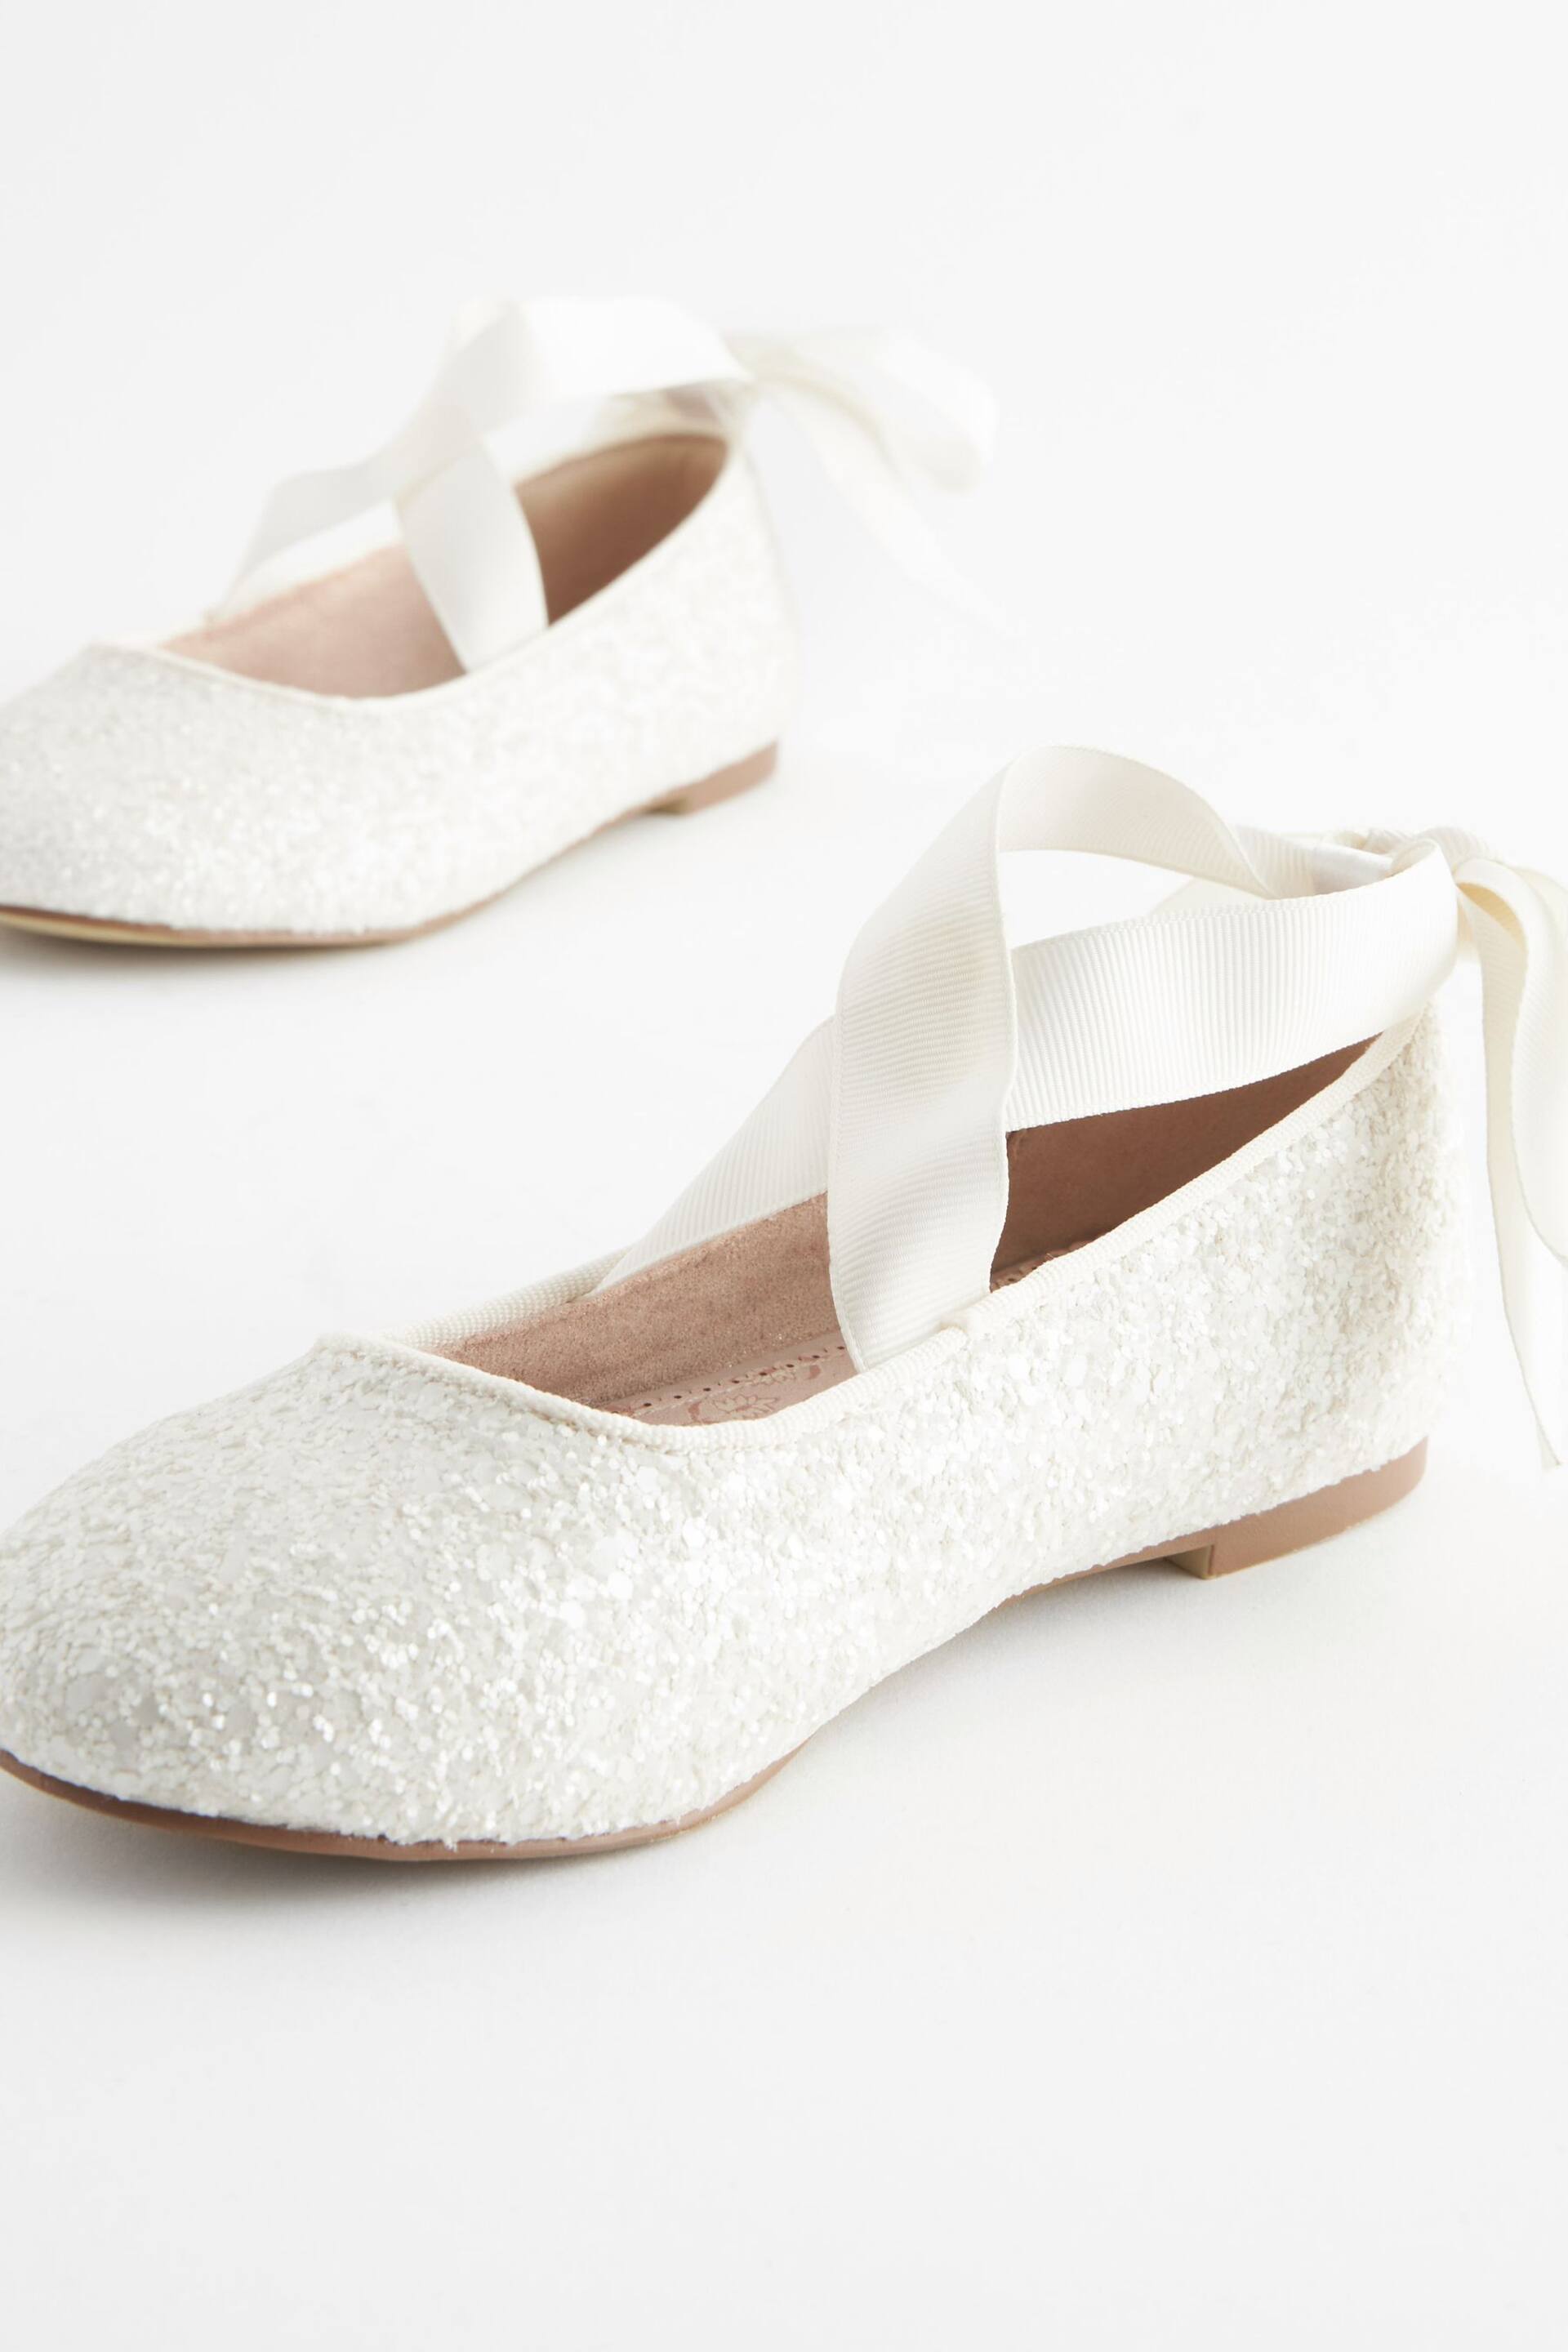 White Glitter Tie Ballerina Occasion Shoes - Image 3 of 5